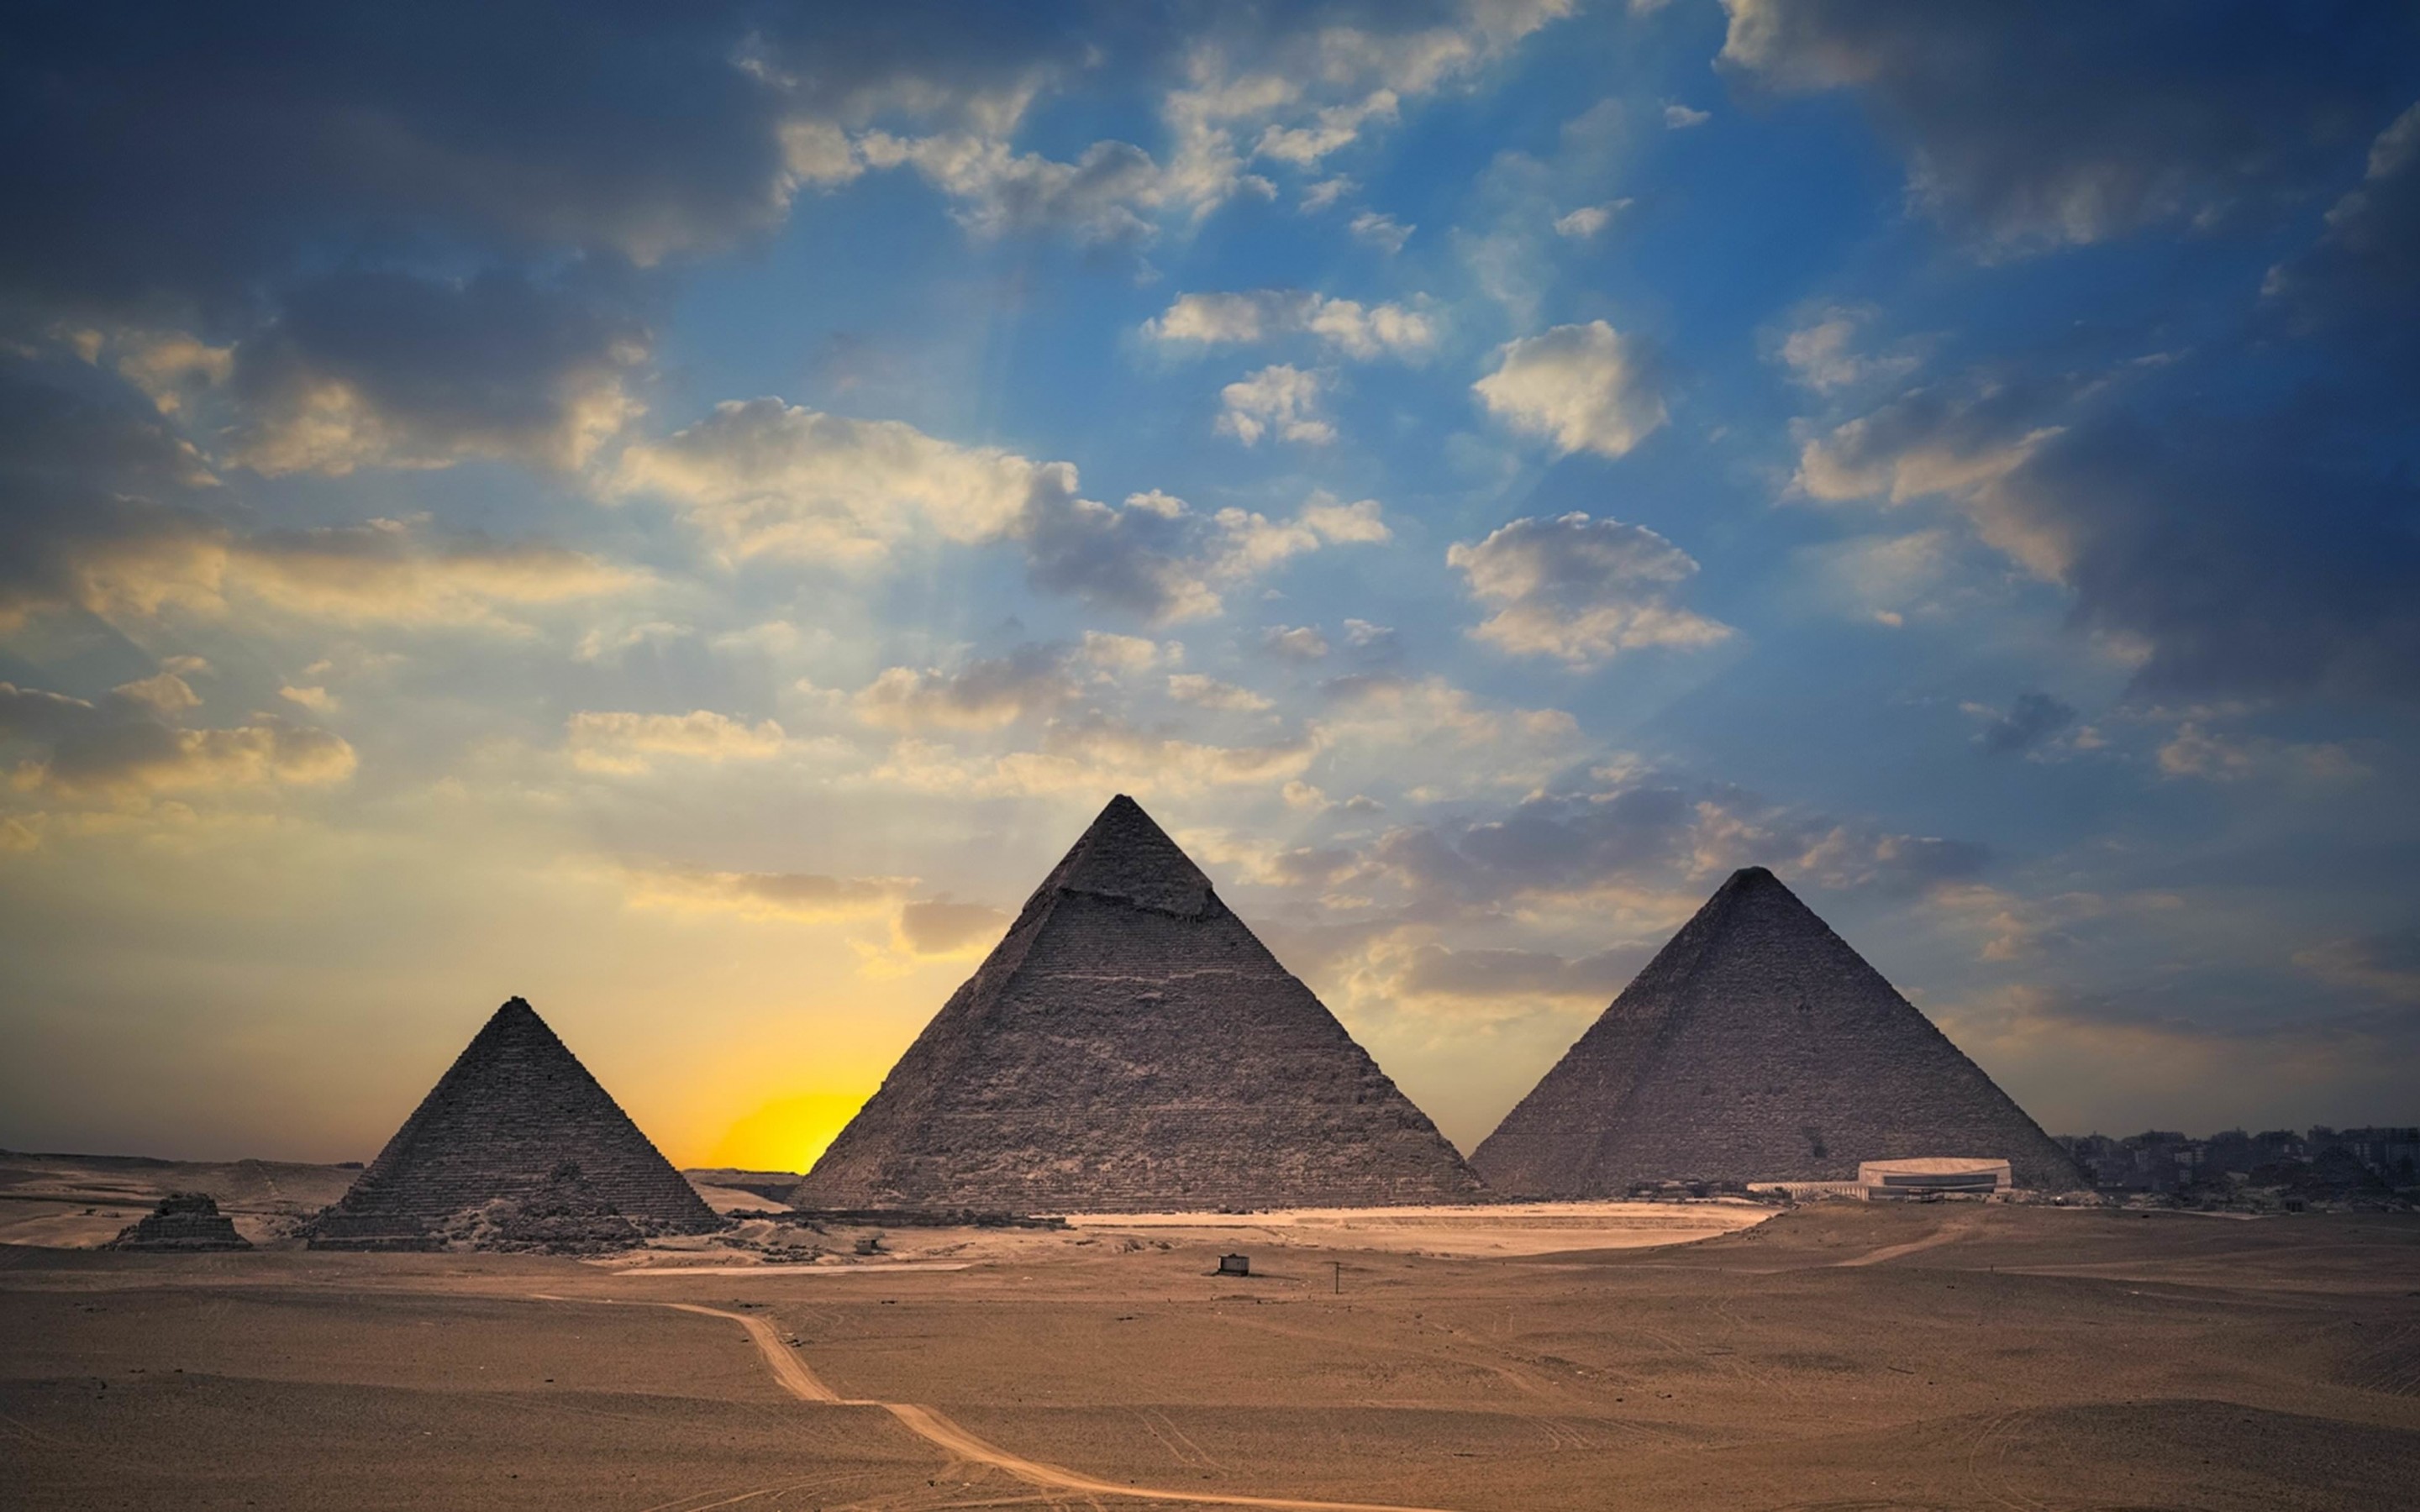 The Great Pyramids of Giza Wallpaper for Desktop 2880x1800